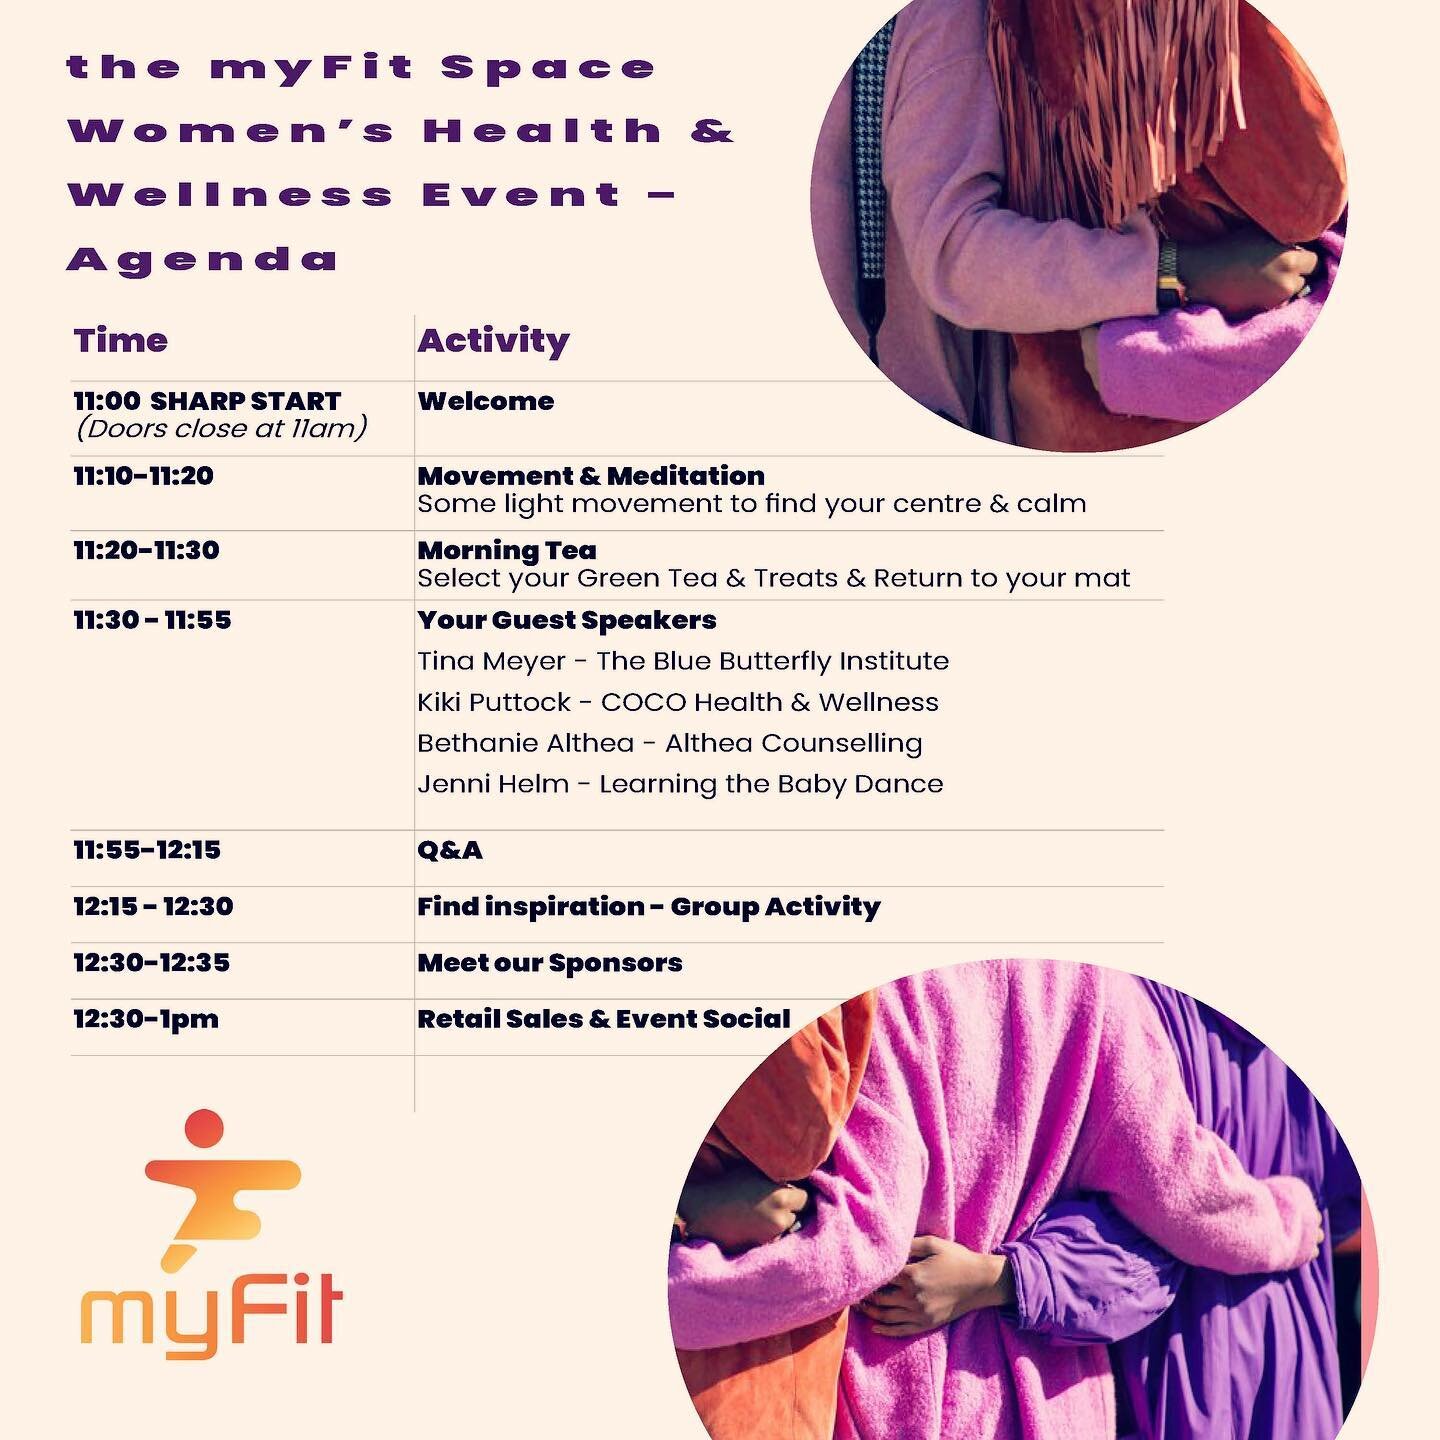 One more sleep!! Your Event Agenda.

Tomorrow we welcome you to the very first myFit Space Women&rsquo;s Wellness Event! Goodie bags are packed, drinks are chilling, prizes are ready &amp; our team &amp; guest speakers can&rsquo;t wait to meet you!

